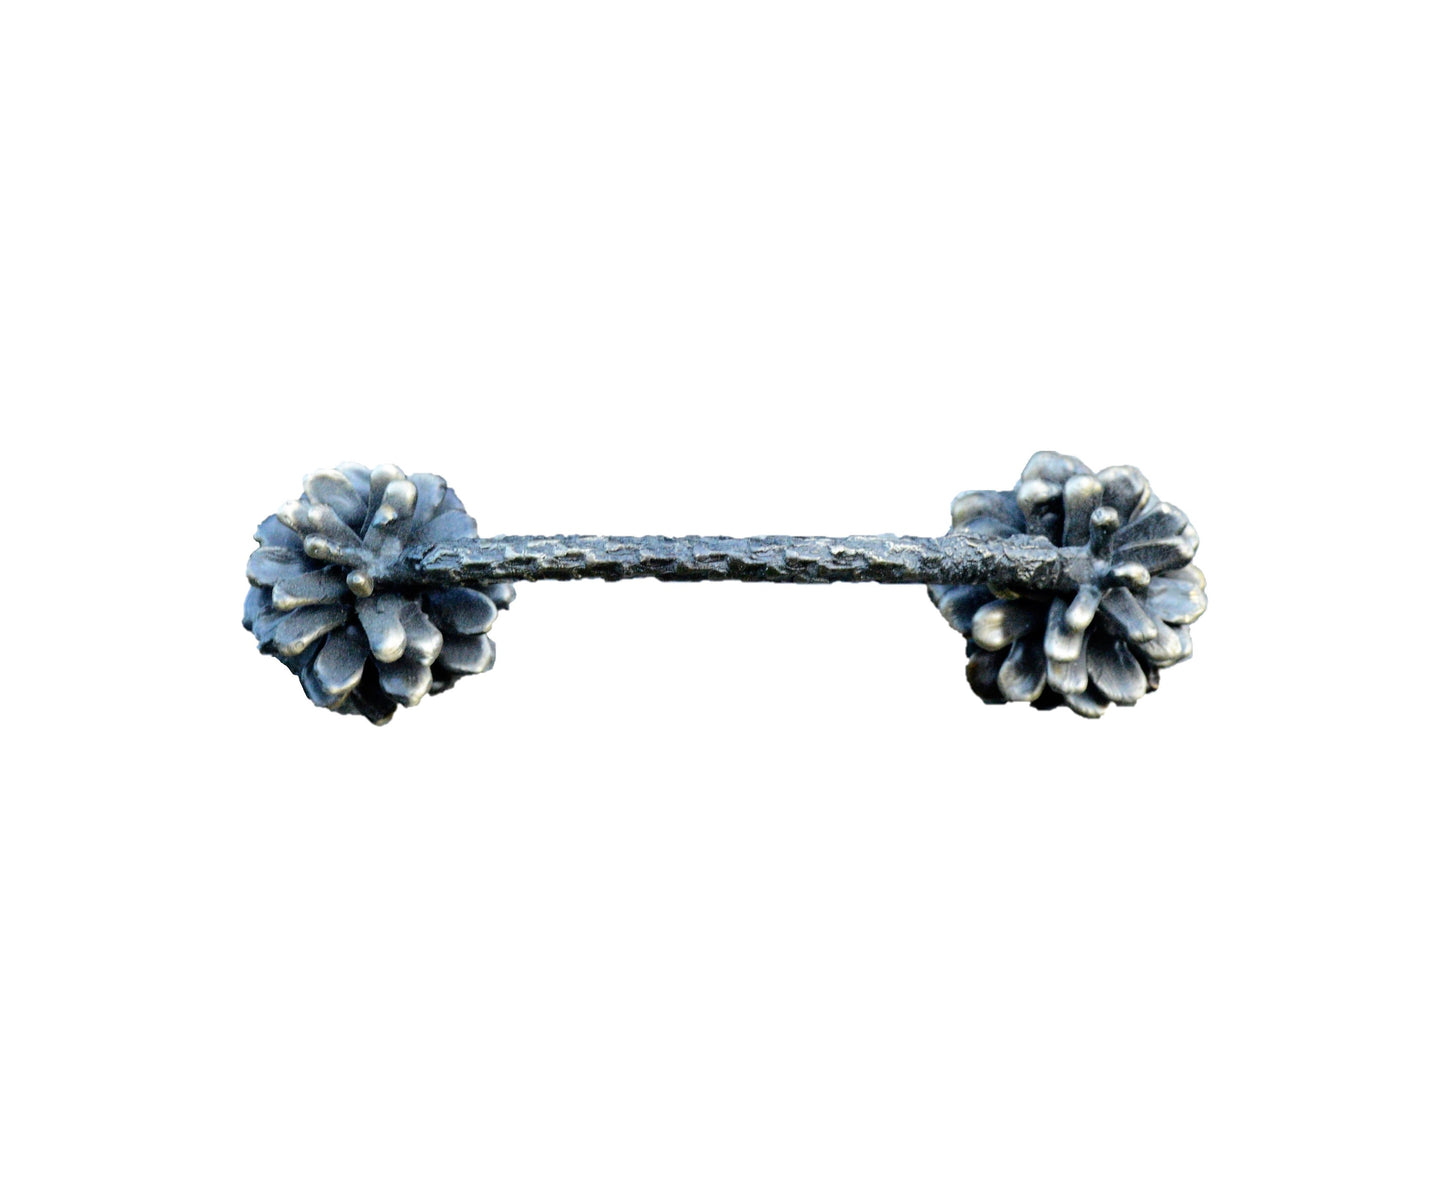 Lodgepole pine cone drawer pull - cabinet handle